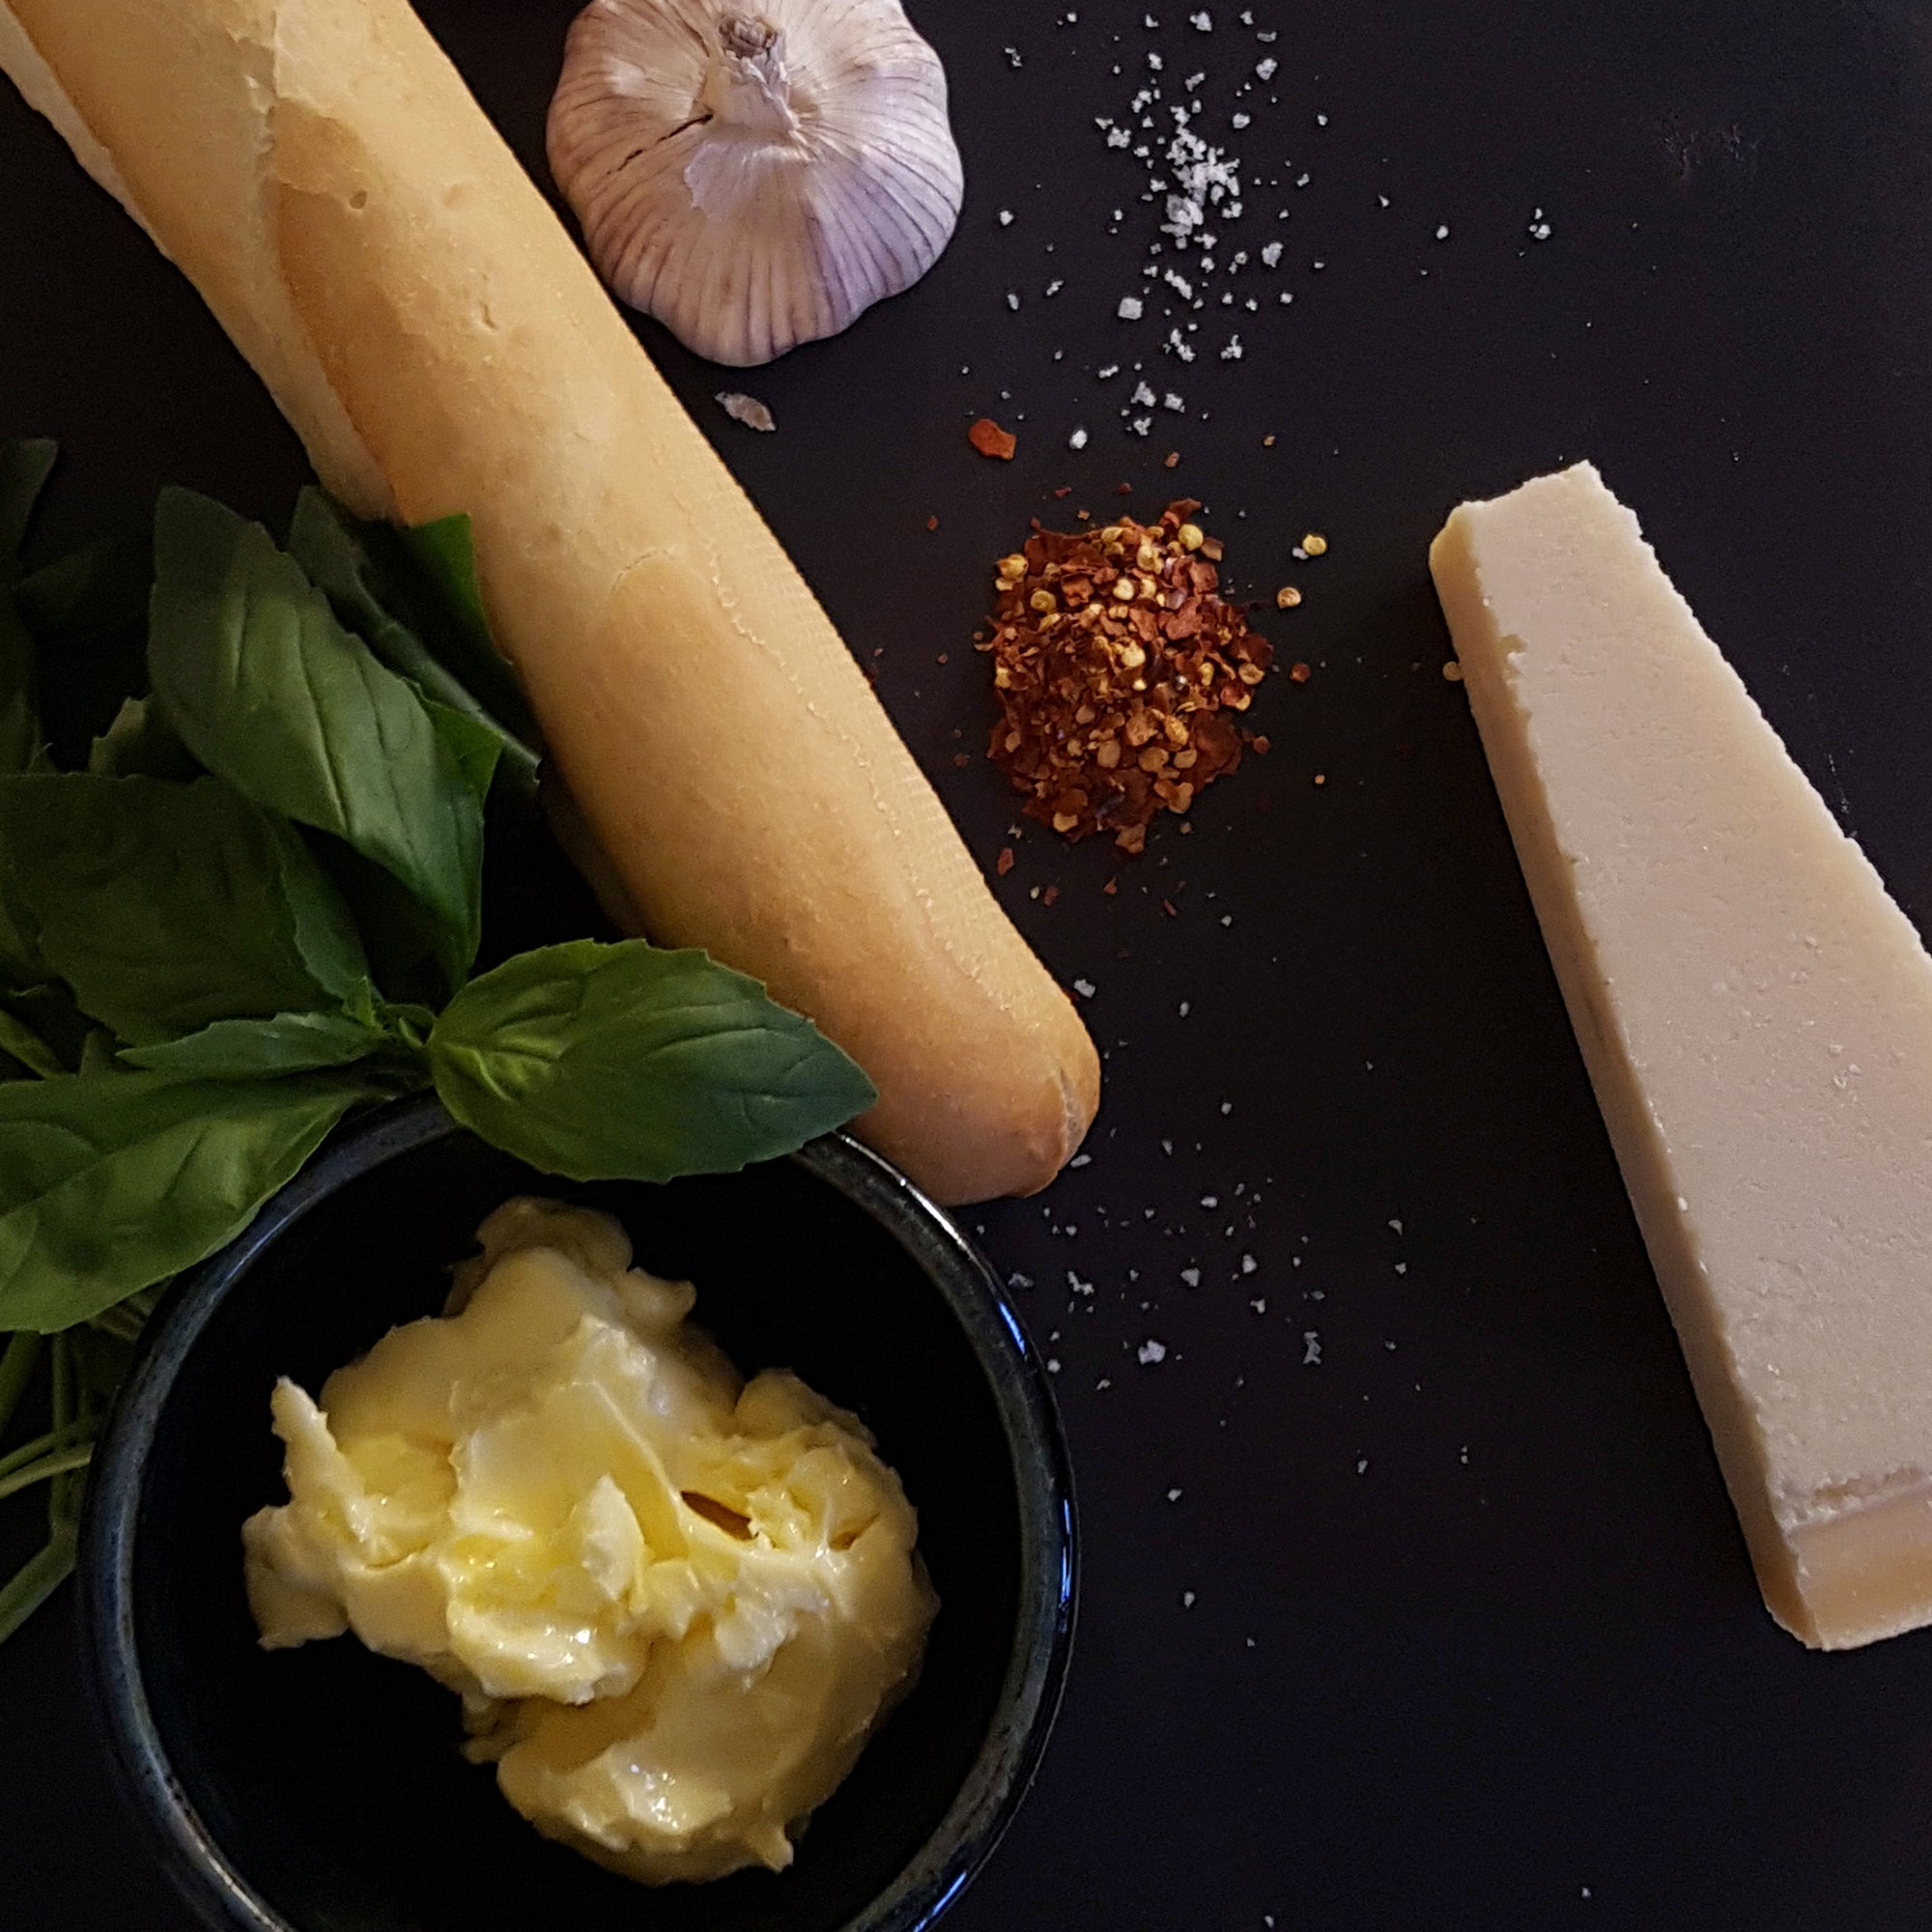 A Garlic Baguette... With a Difference!